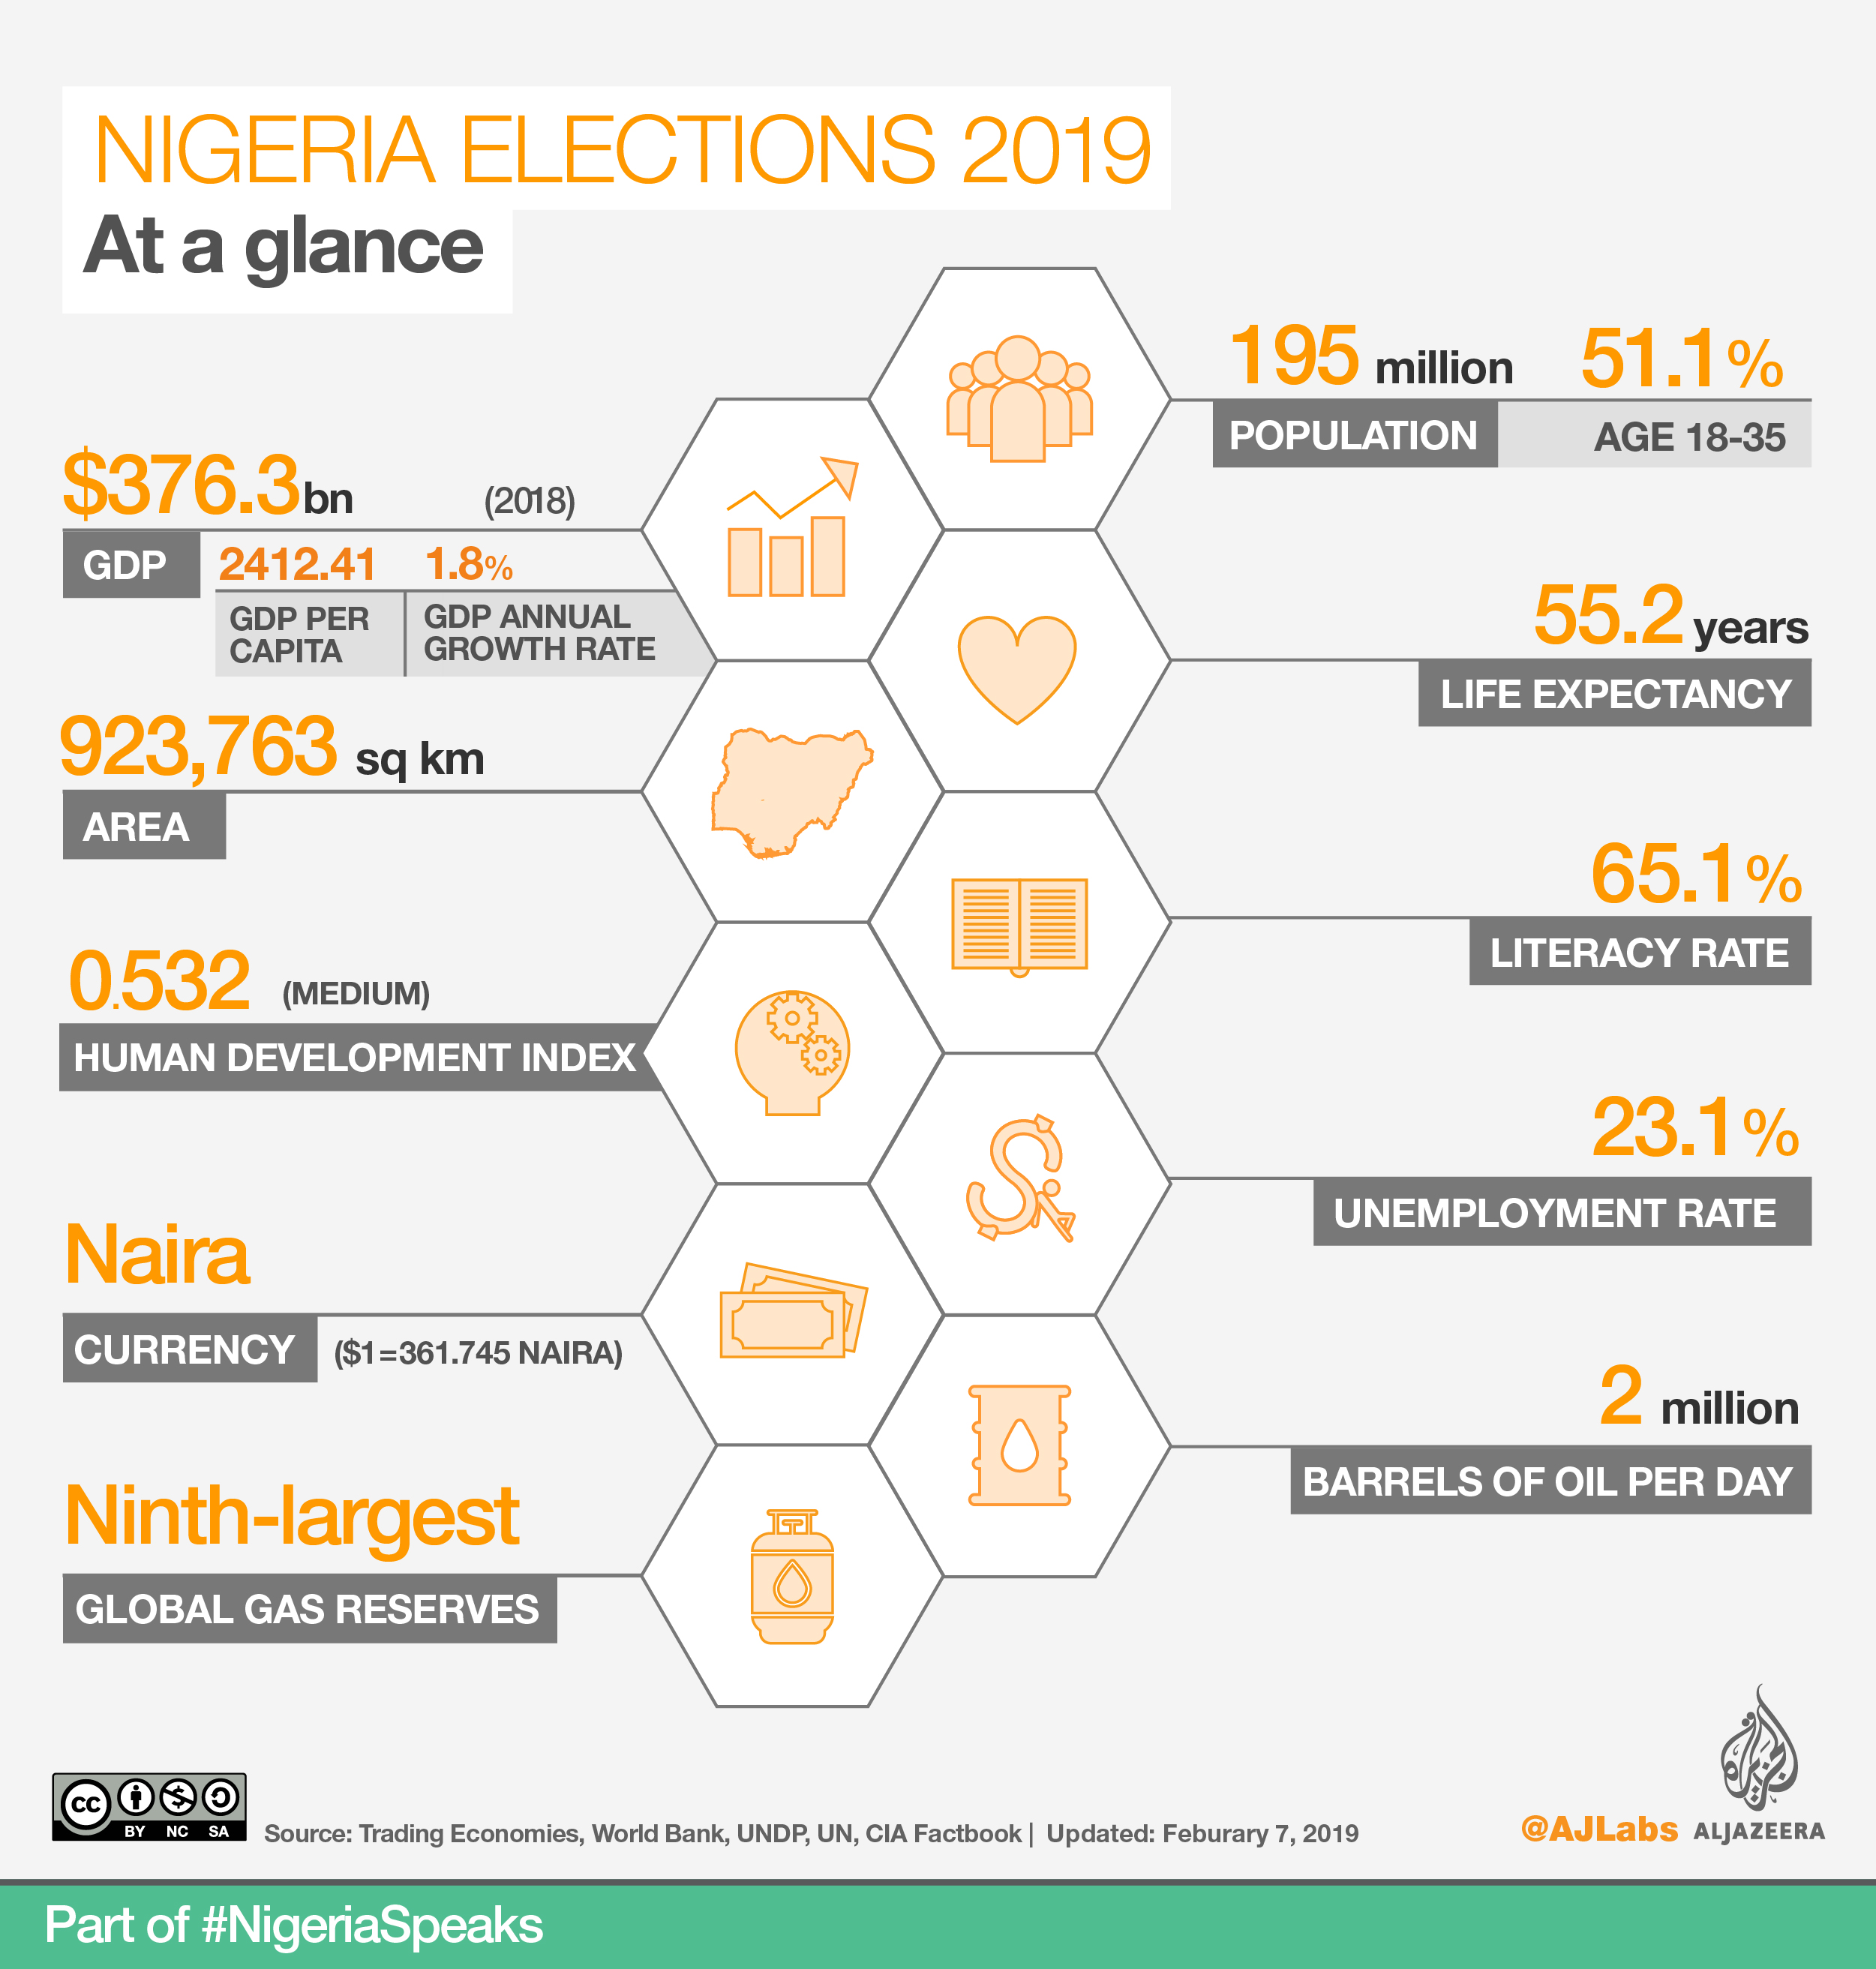 Nigeria elections: All you need to know | Elections News | Al Jazeera